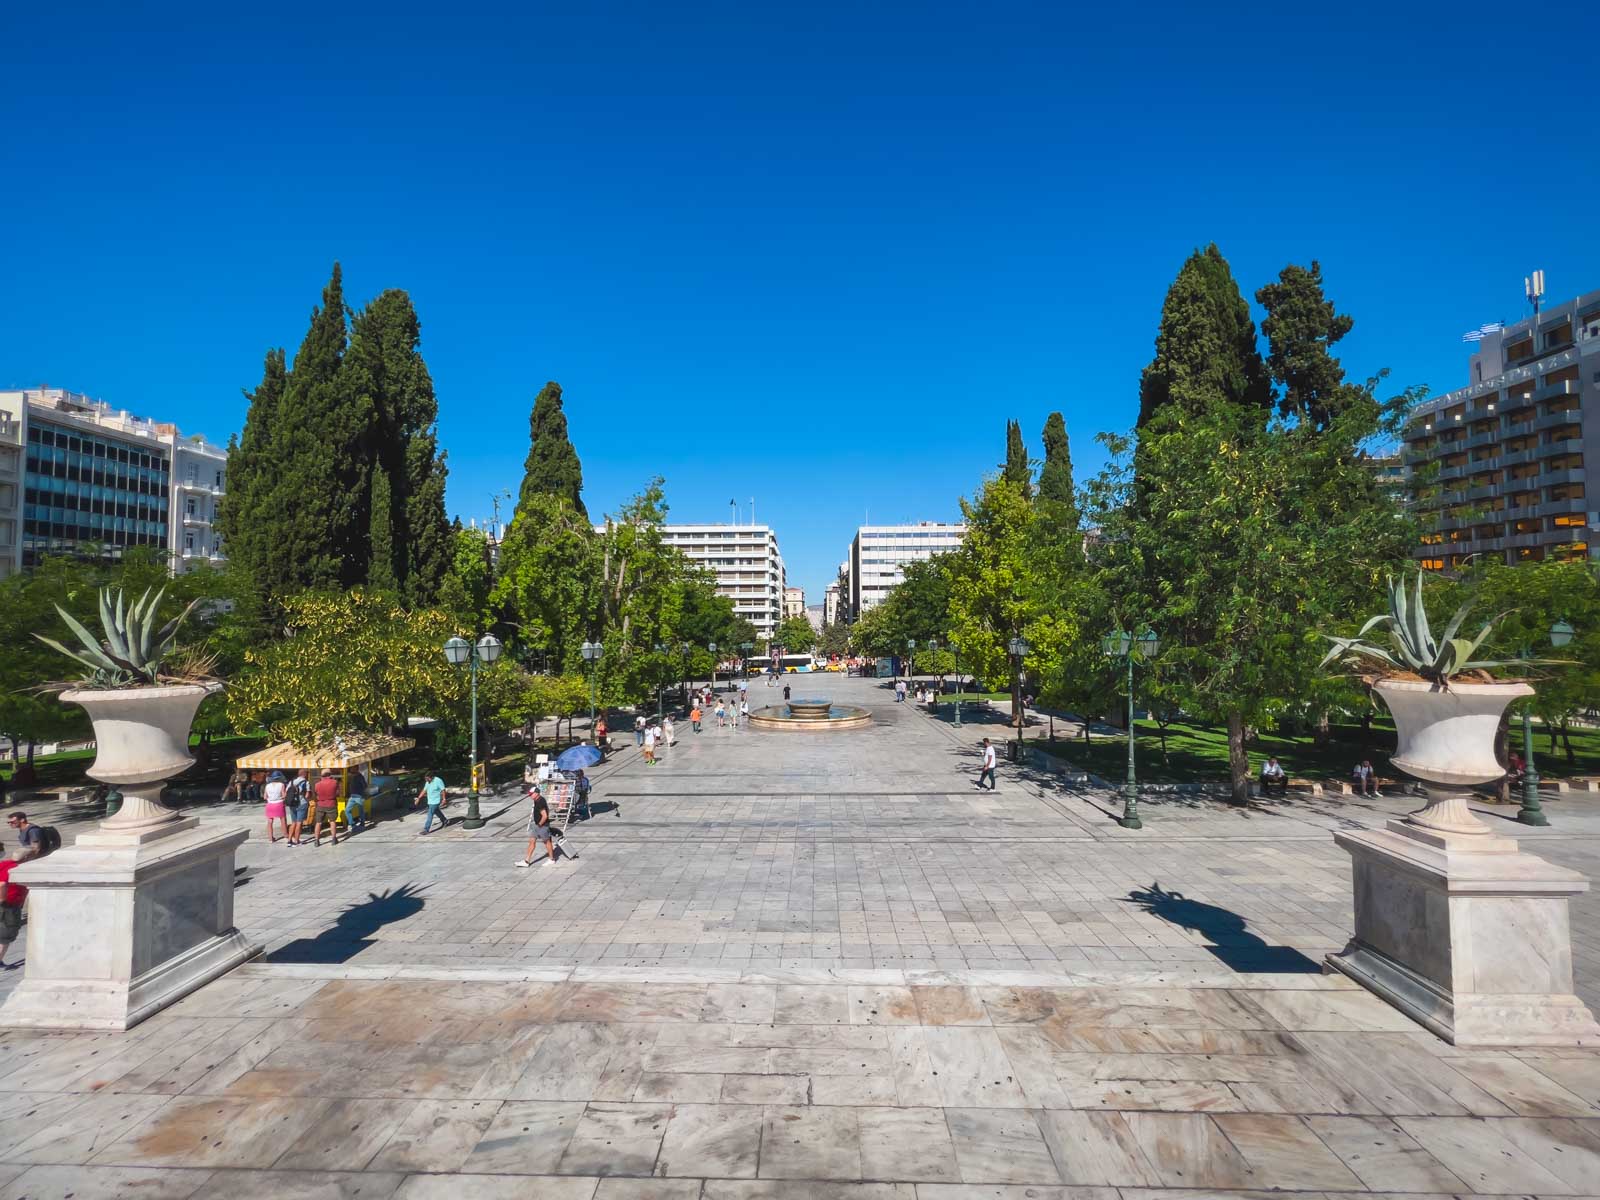 Looking down Syntagma Square in Athens